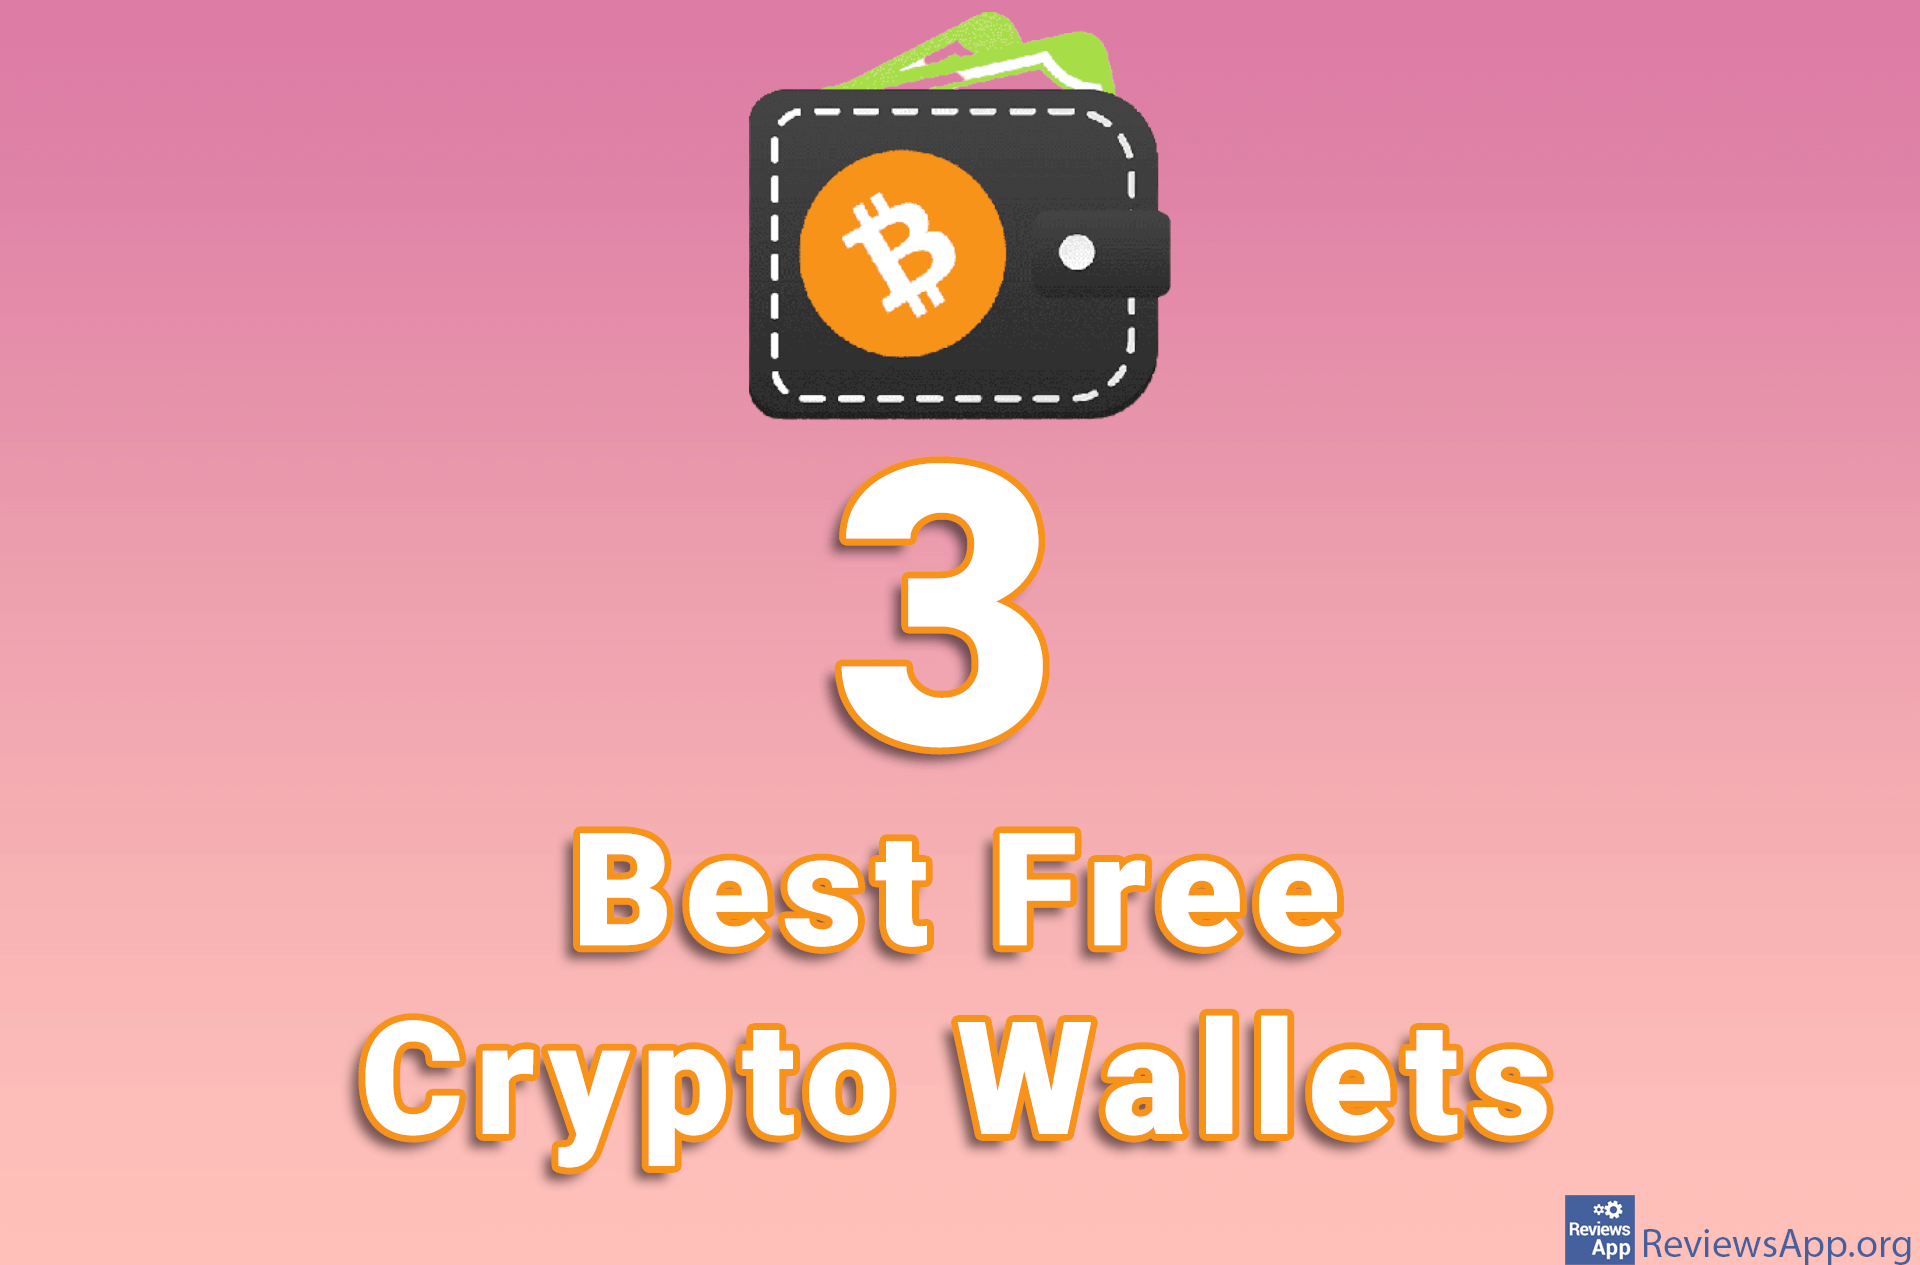 3 Best Free Crypto Wallets